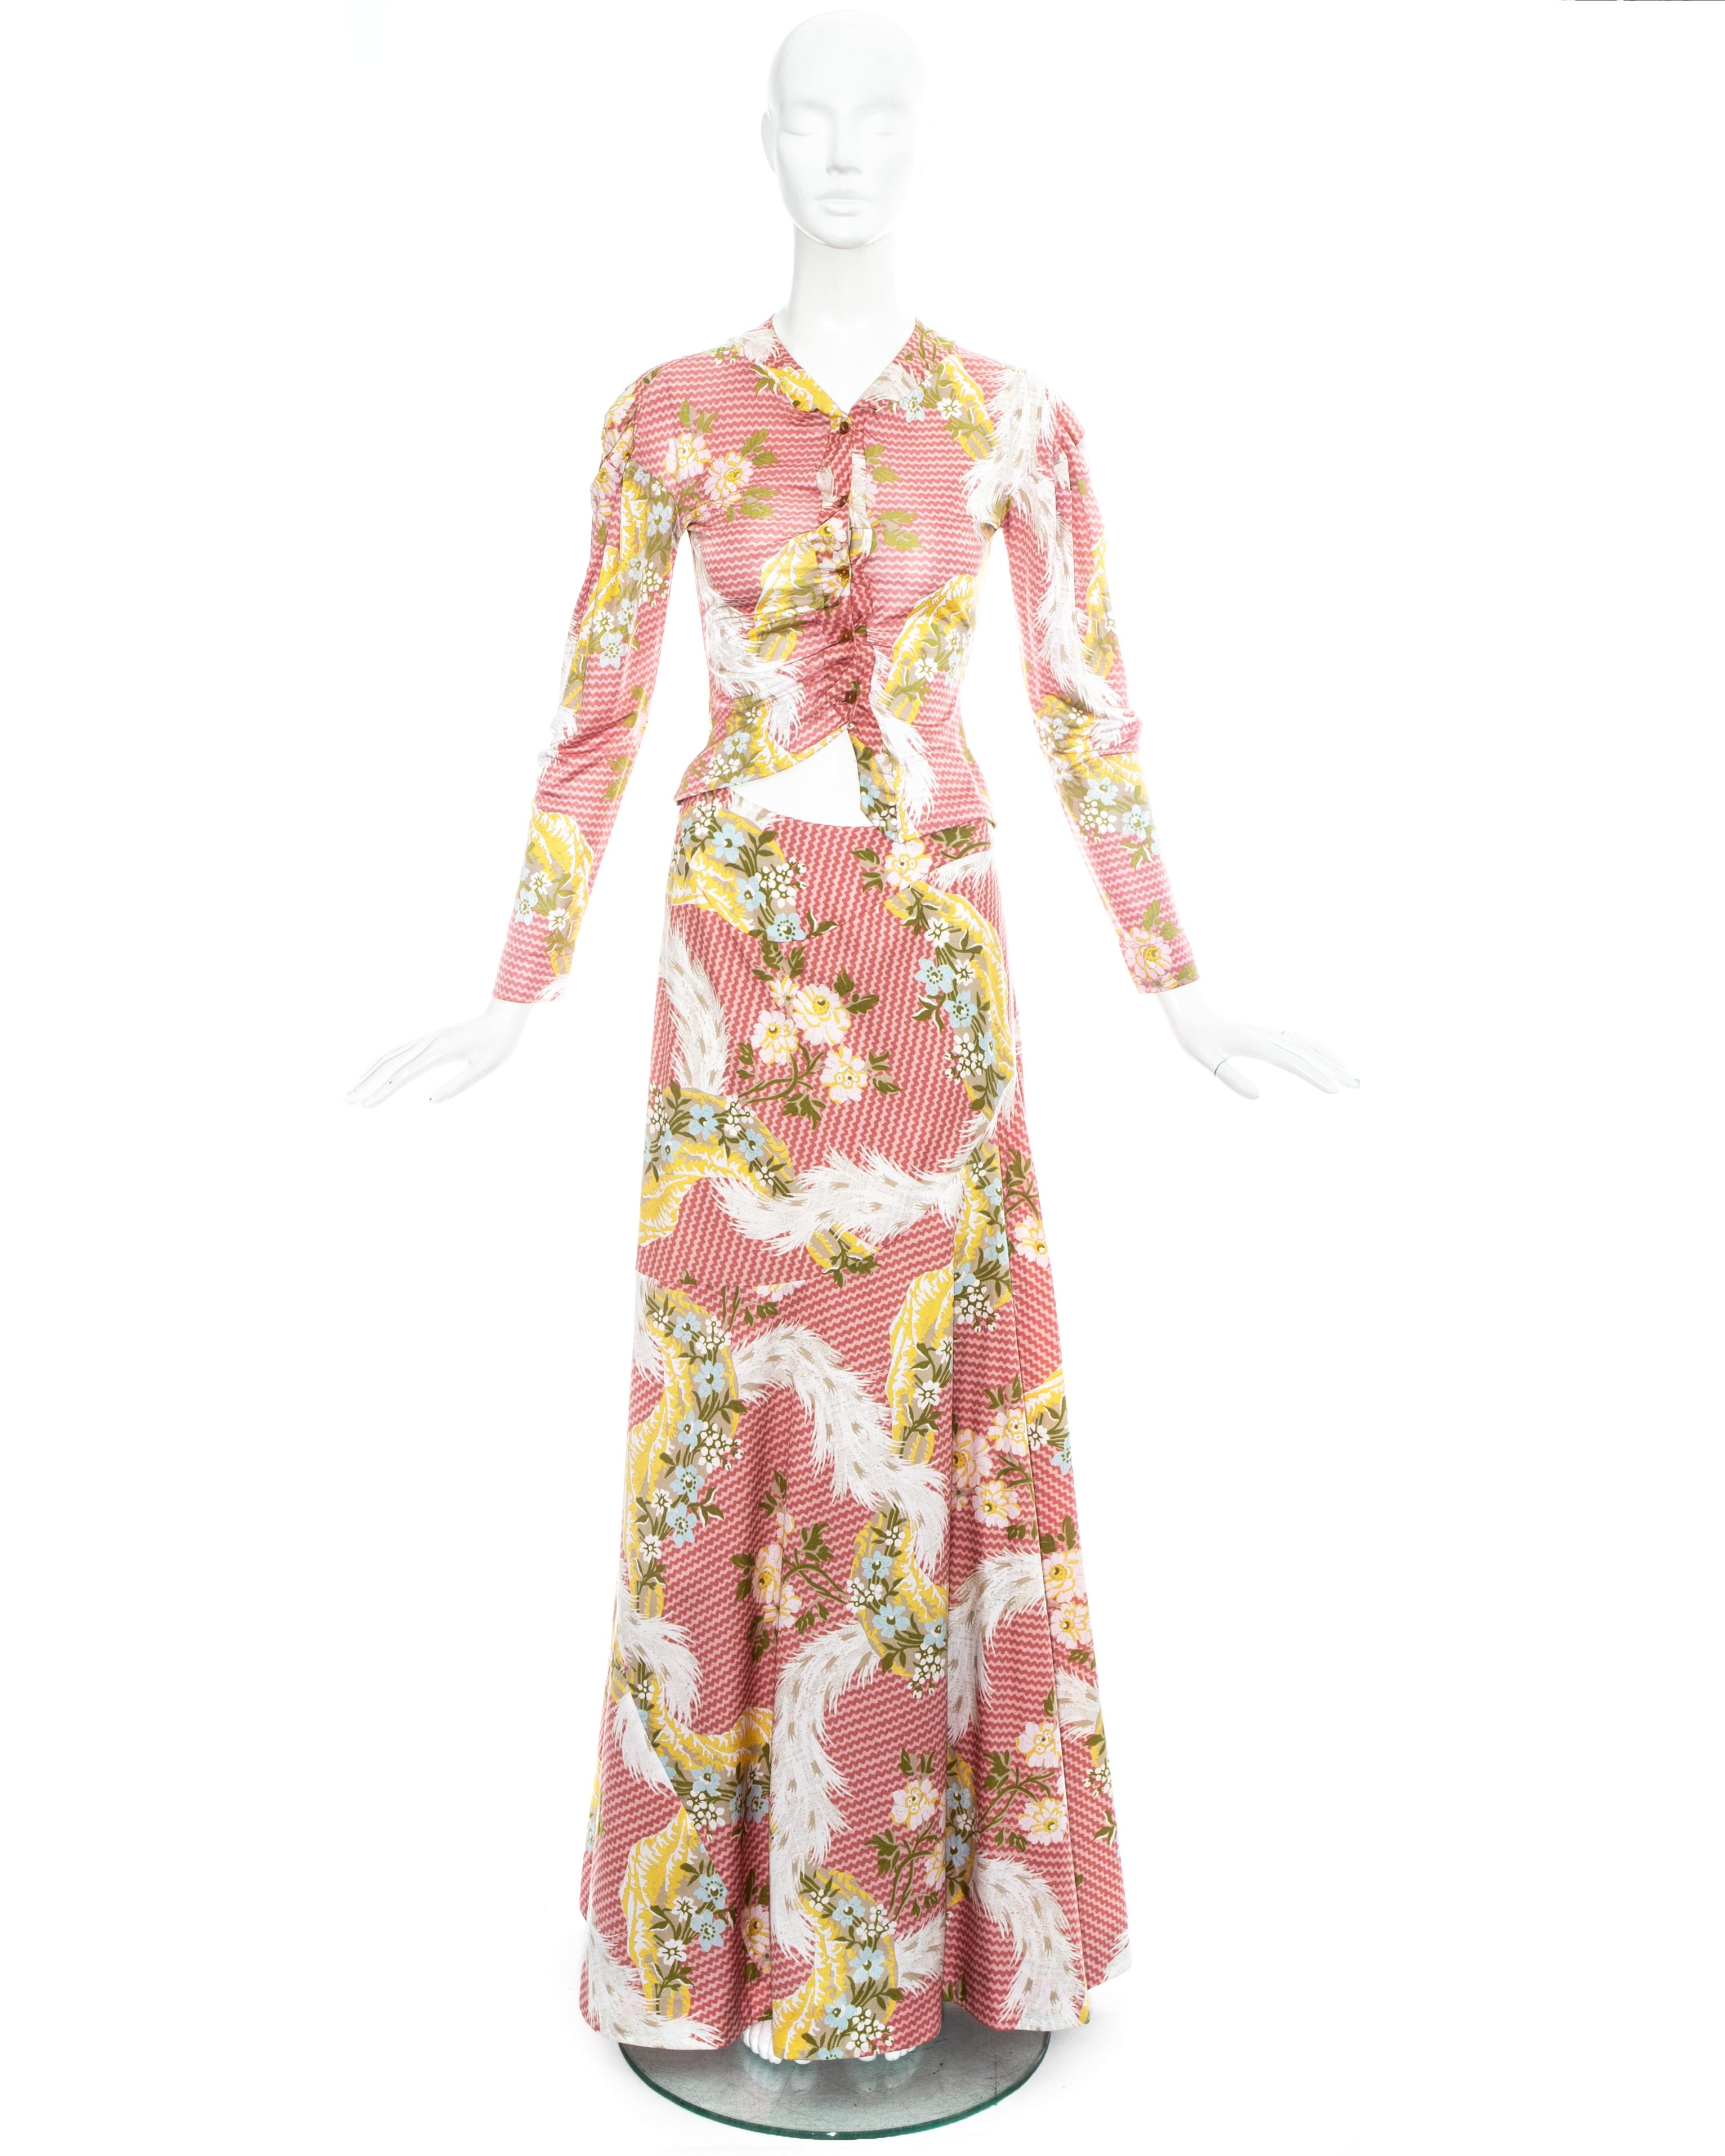 Vivienne Westwood pink floral printed ensemble. Maxi skirt and draped blouse with asymmetric cut.

Spring-Summer 2001